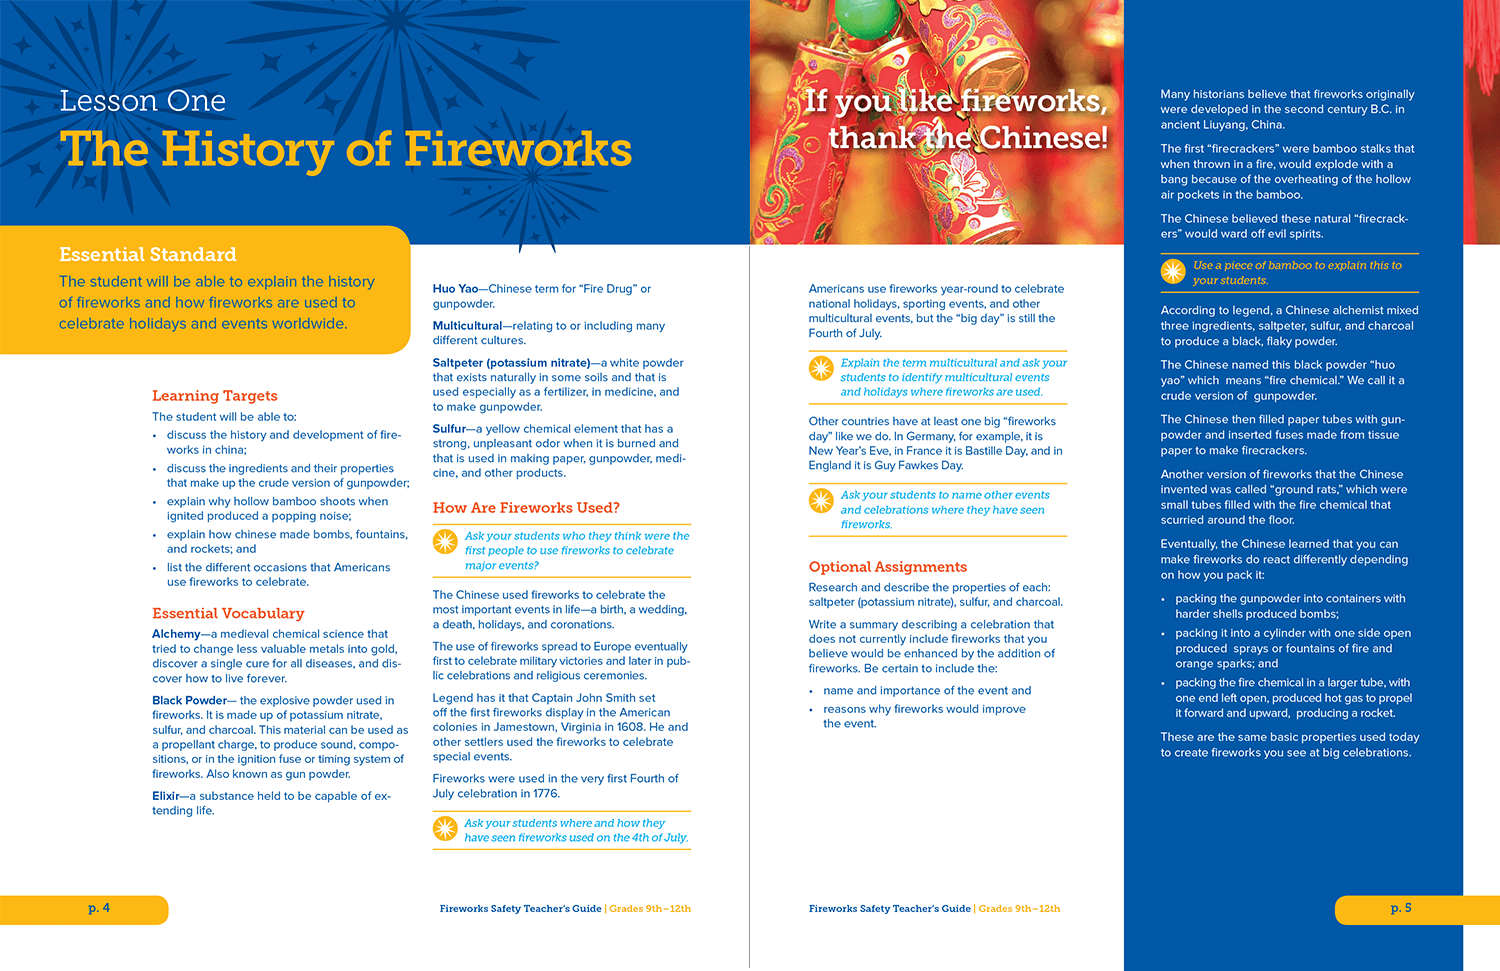 apa_fireworks-guide-3.png